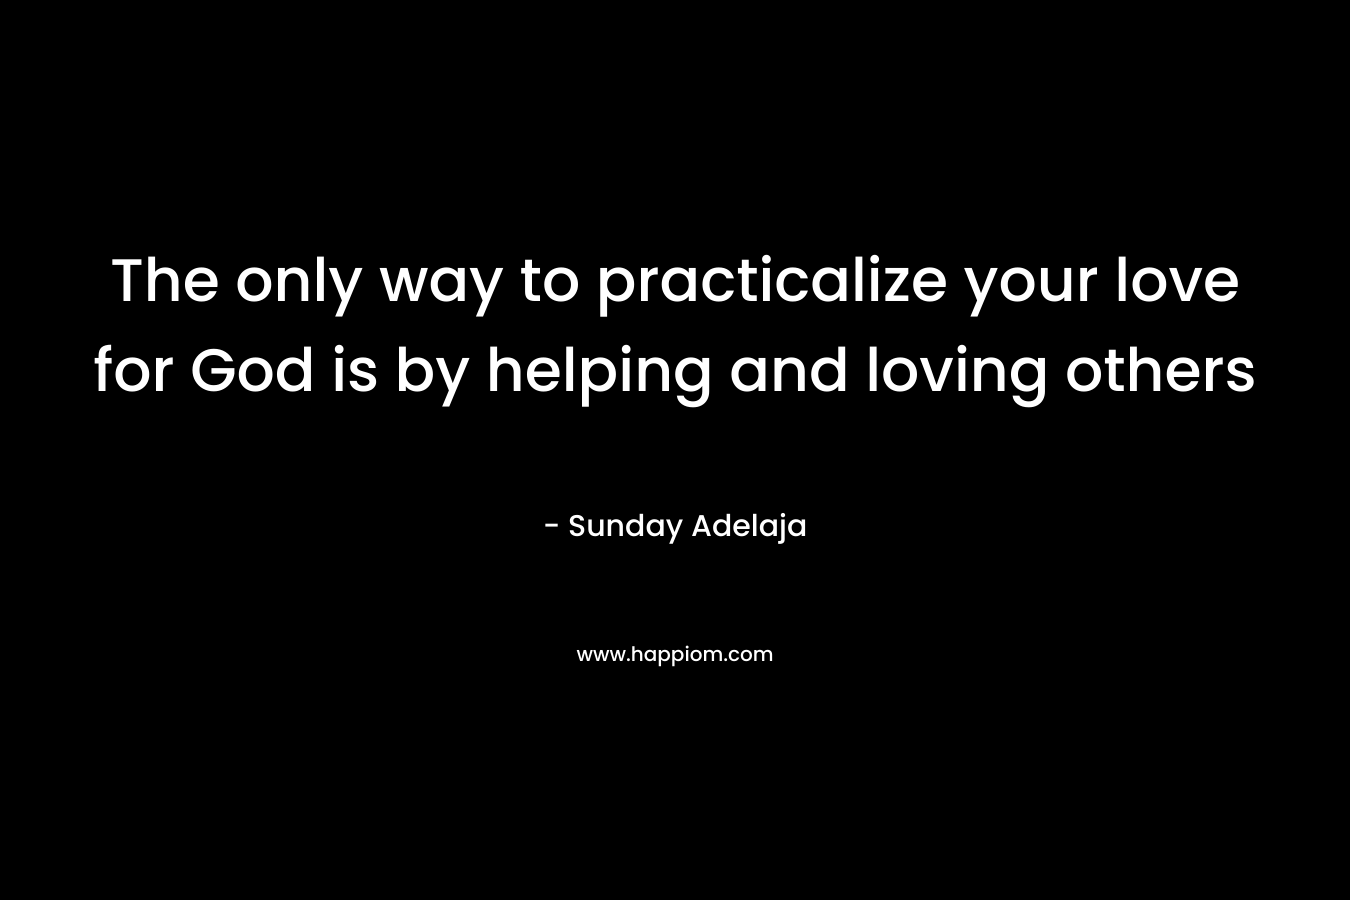 The only way to practicalize your love for God is by helping and loving others